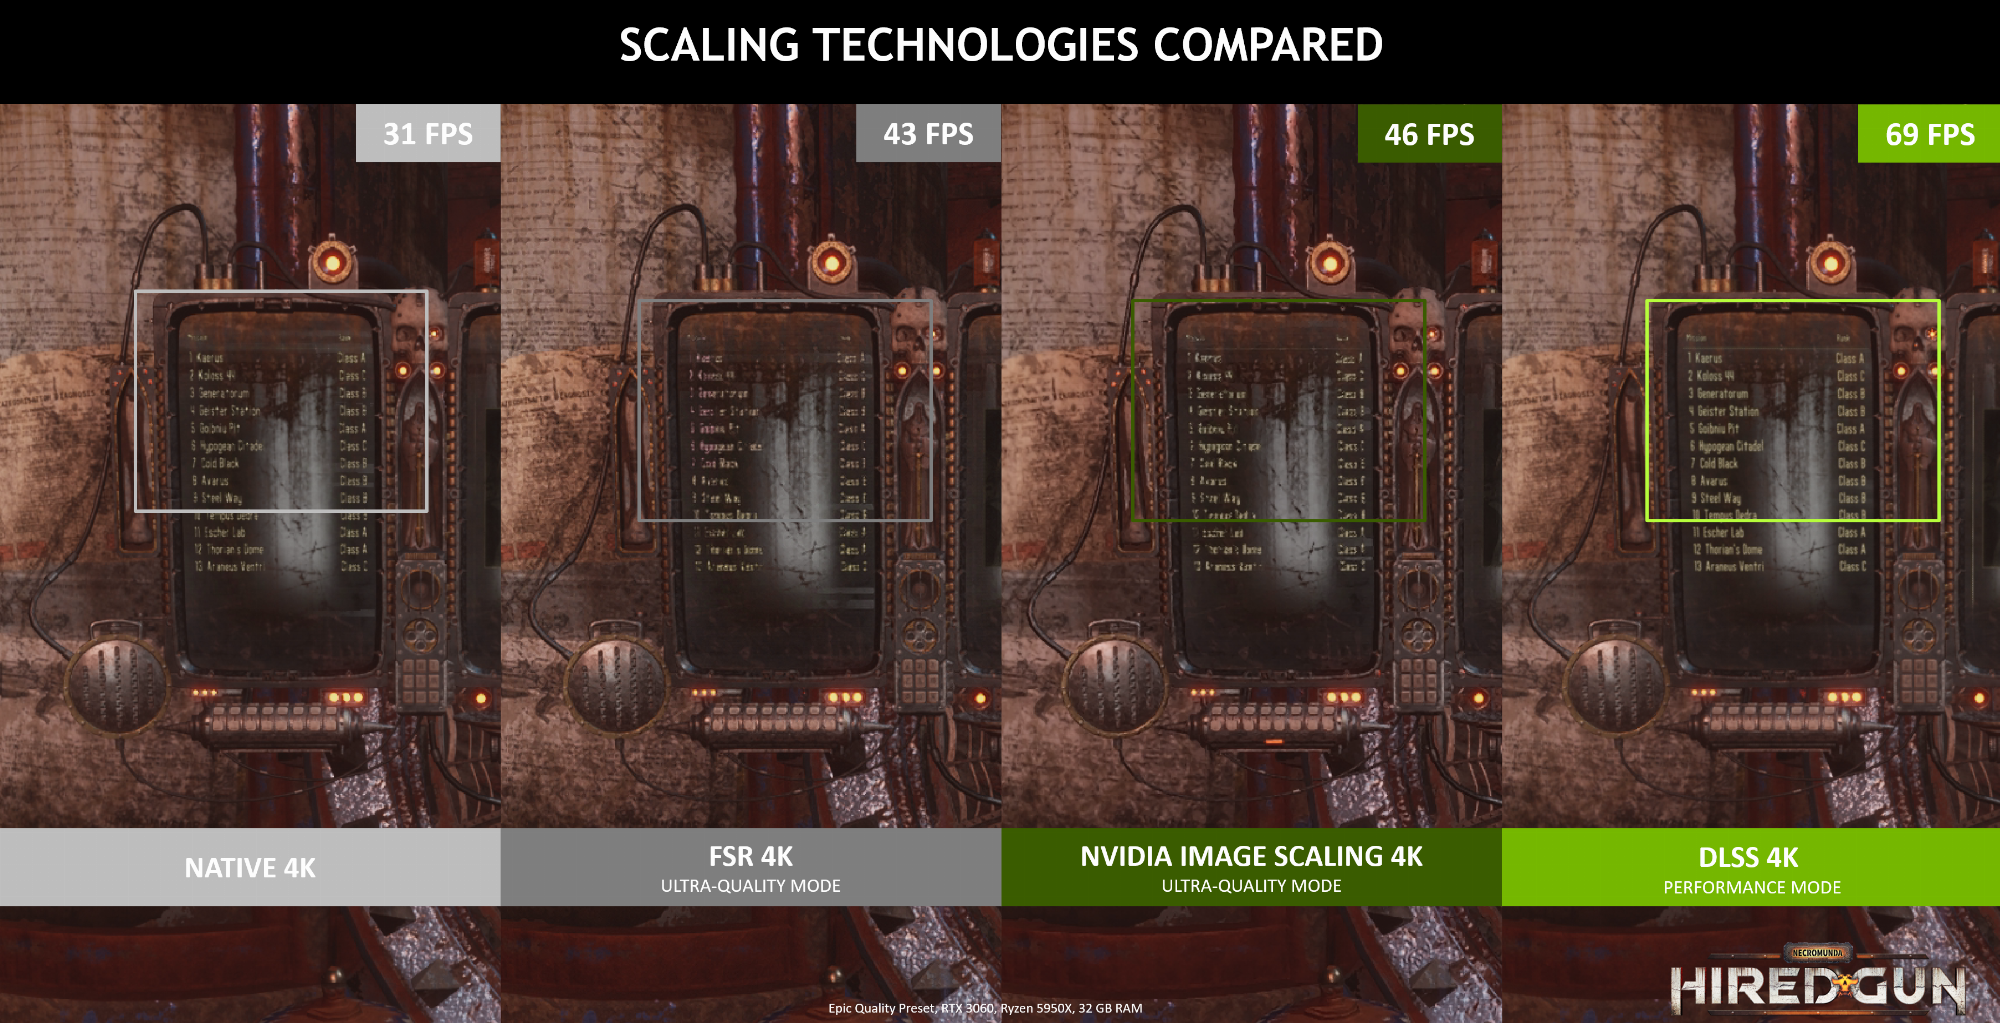 1-necromunda-hired-gun-scaling-techniques-compared.png